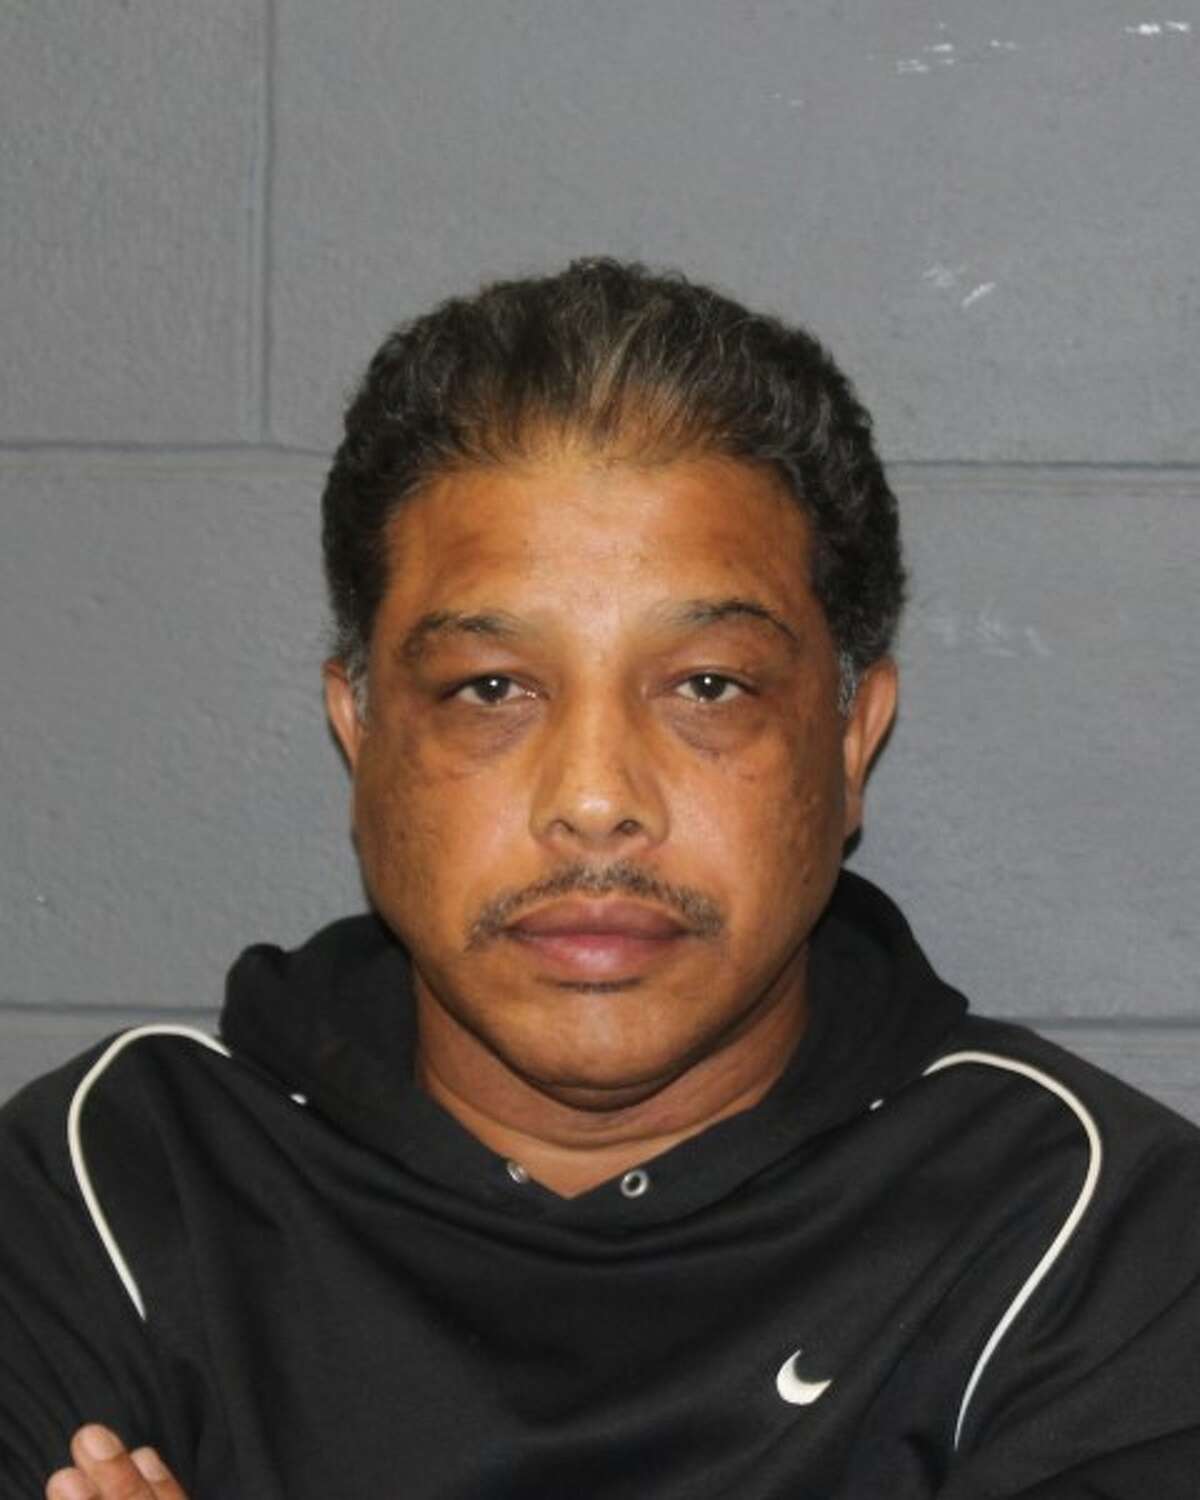 Luis Silva-Gomes, 53, of Waterbury, is responsible for a series of burglaries at New Mill Restaurant in the Plantsville section of town between June and September, according to Southington police.